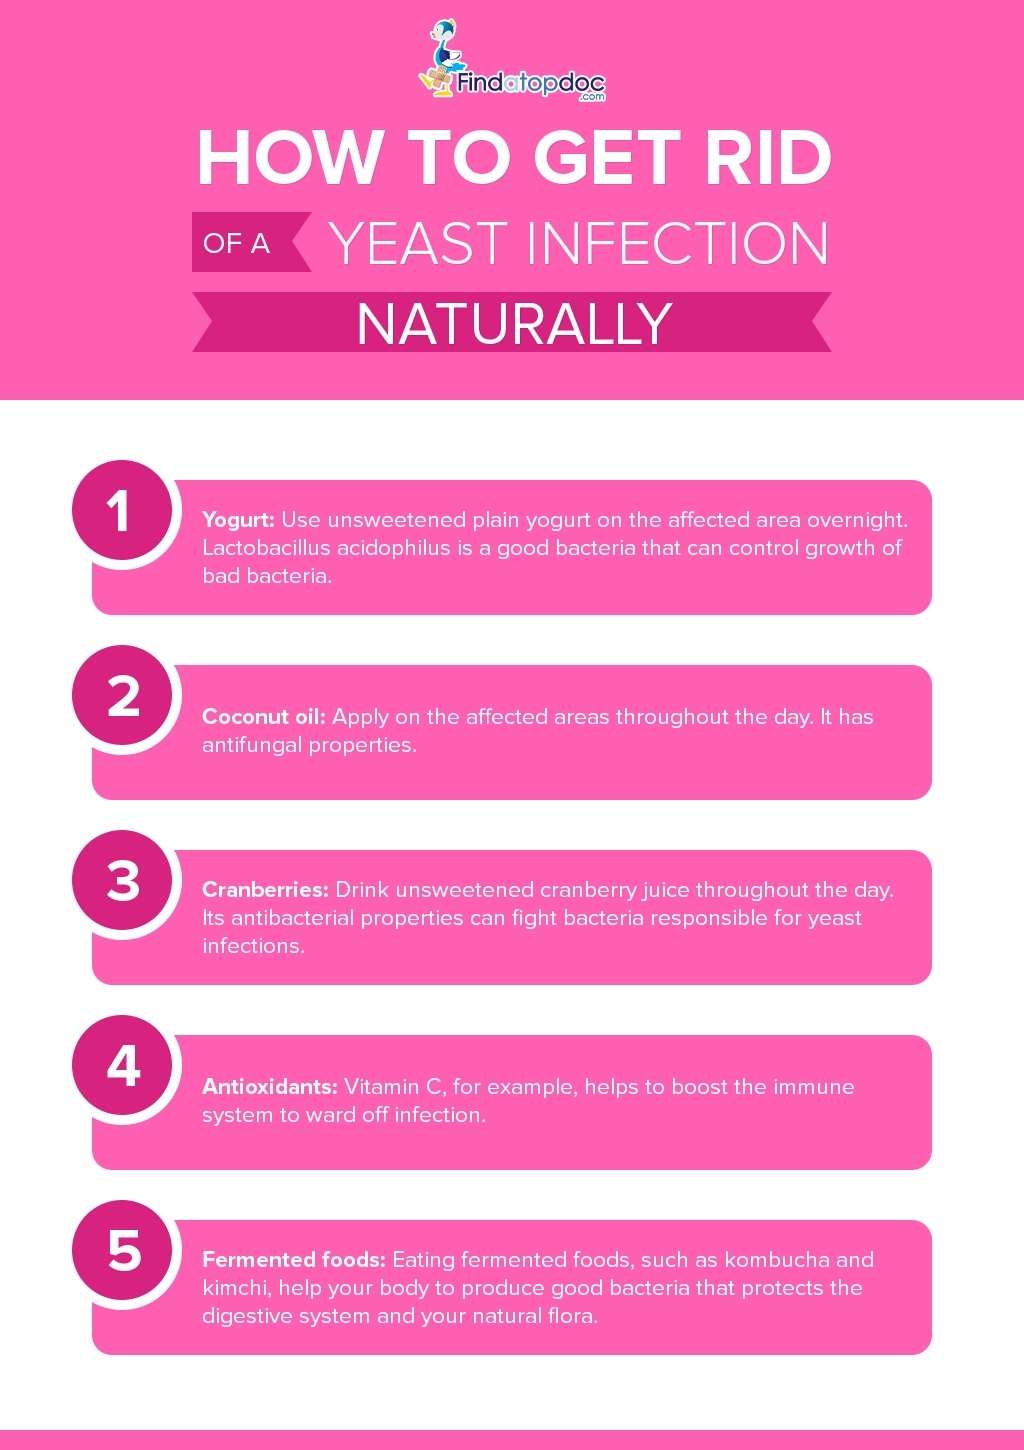 How to Get Rid of a Yeast Infection Naturally? [Infographic]